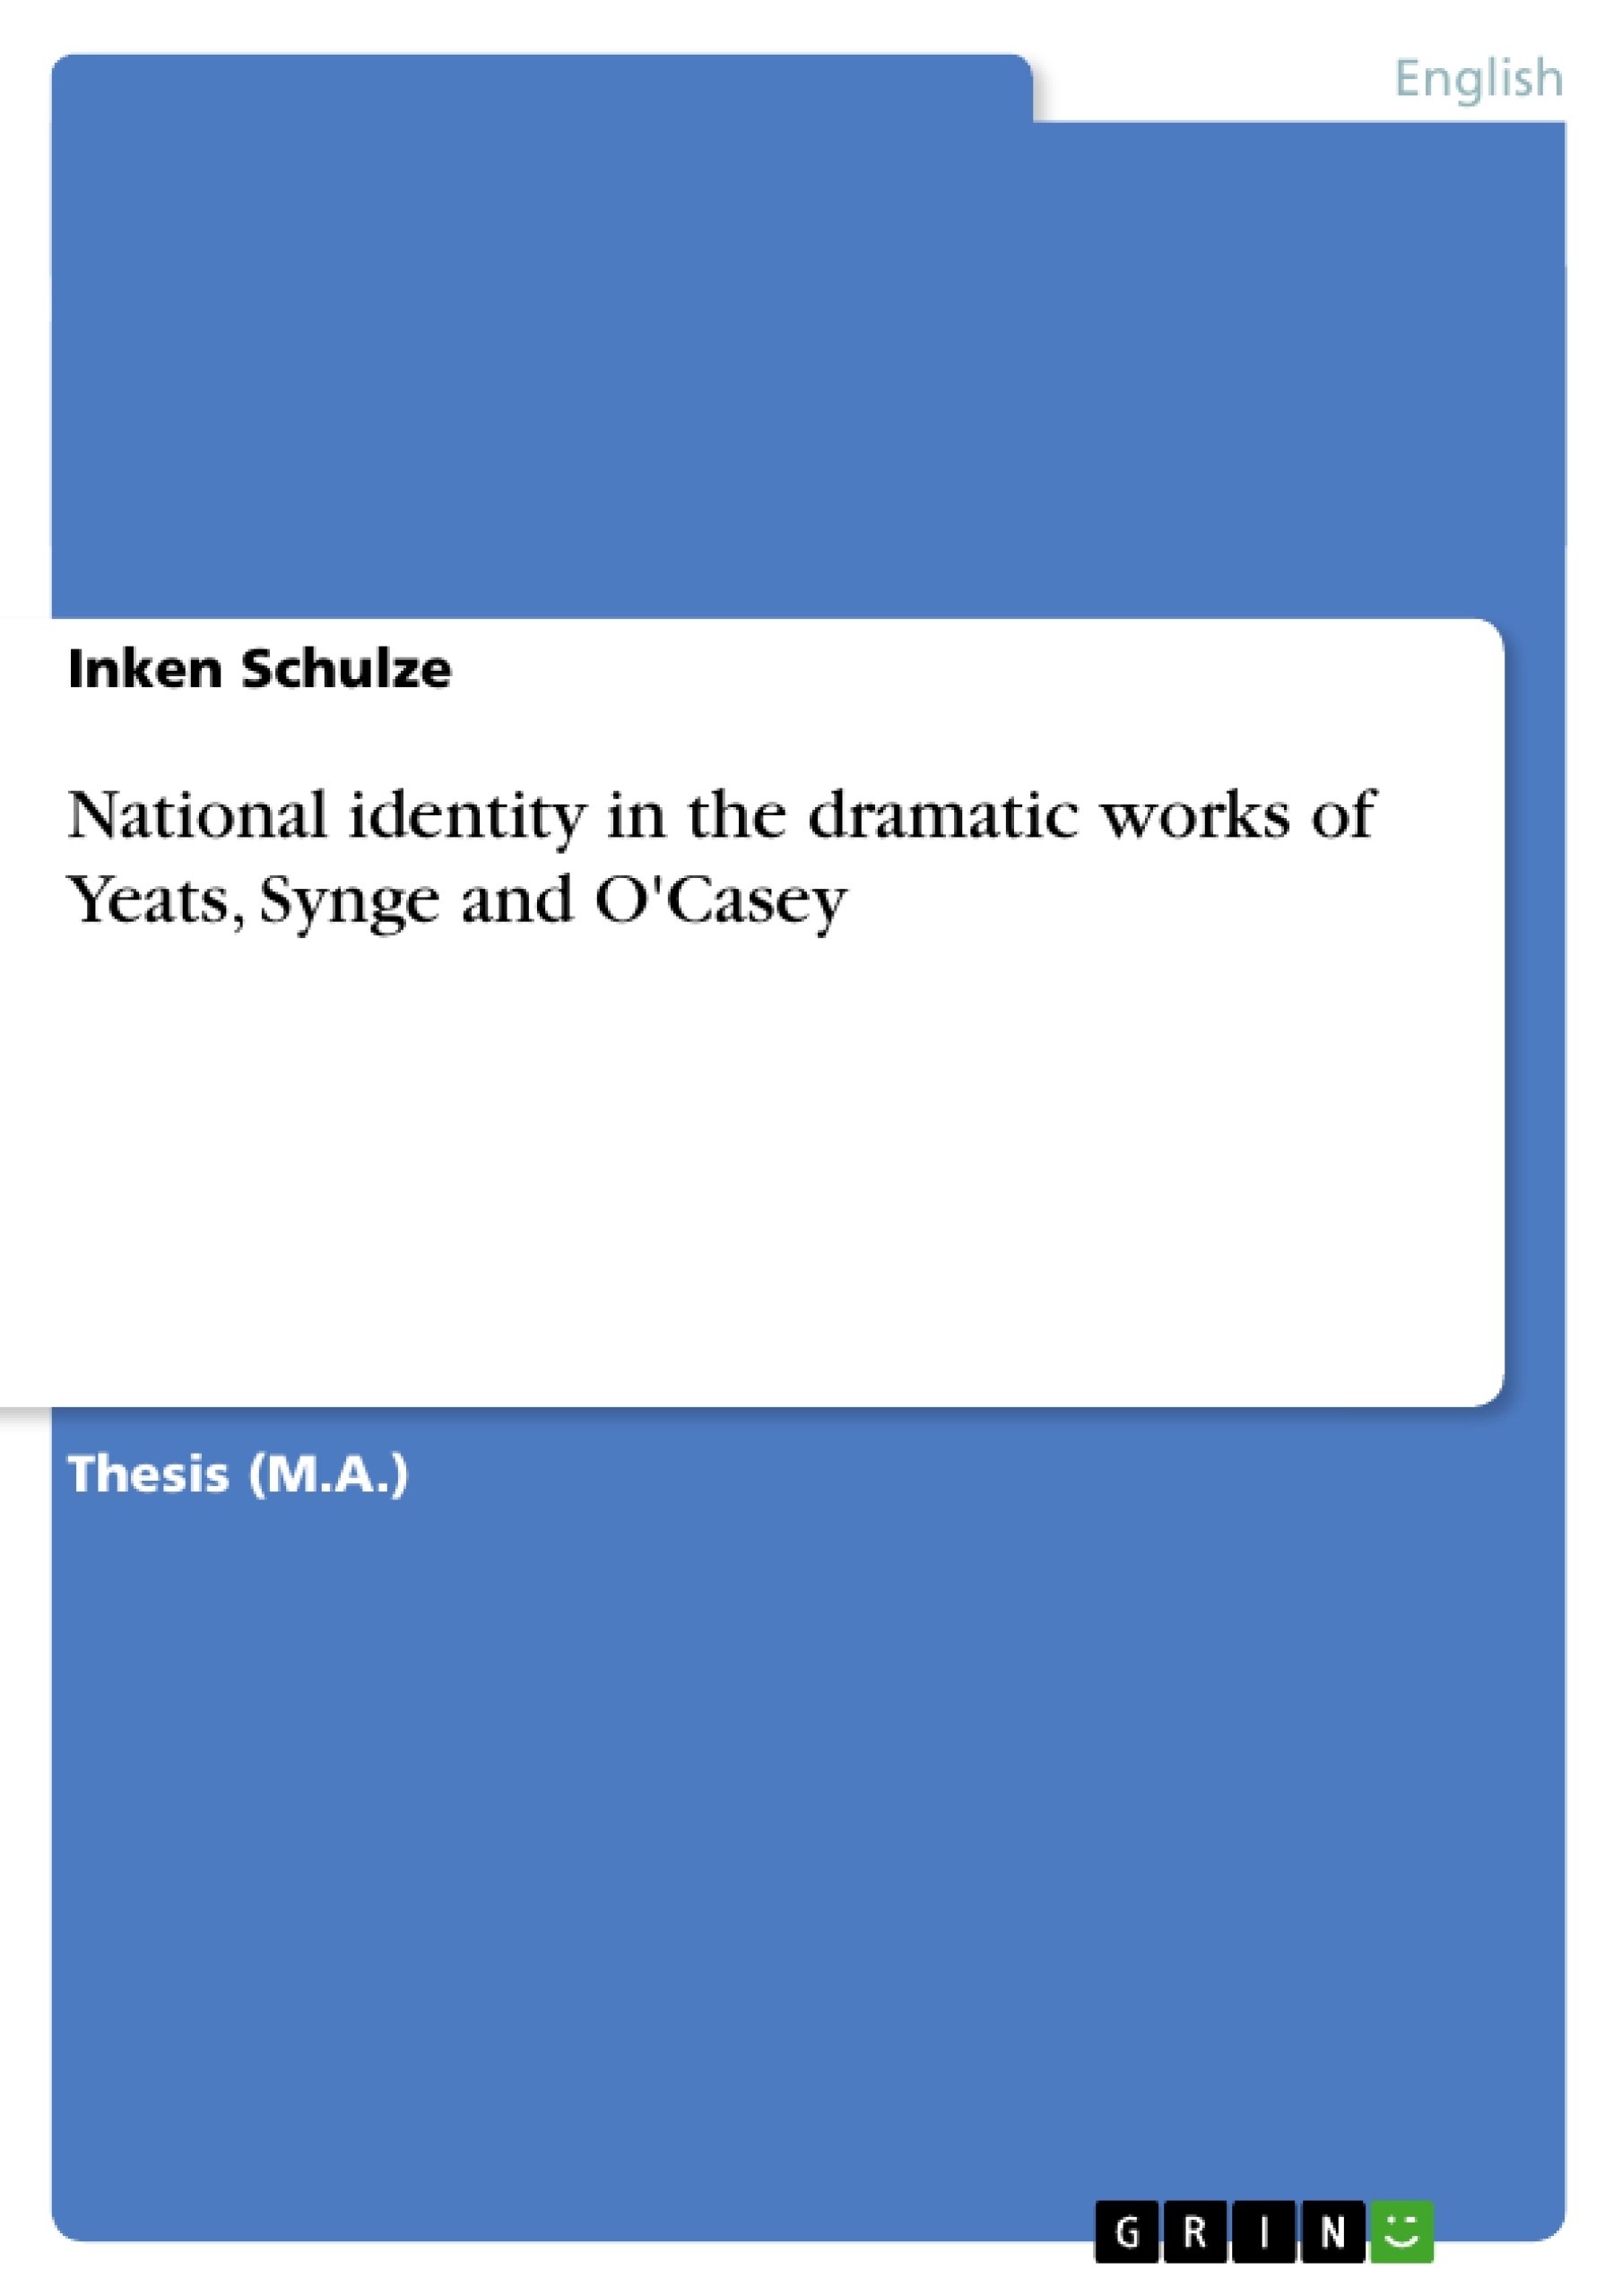 Title: National identity in the dramatic works of Yeats, Synge and O'Casey